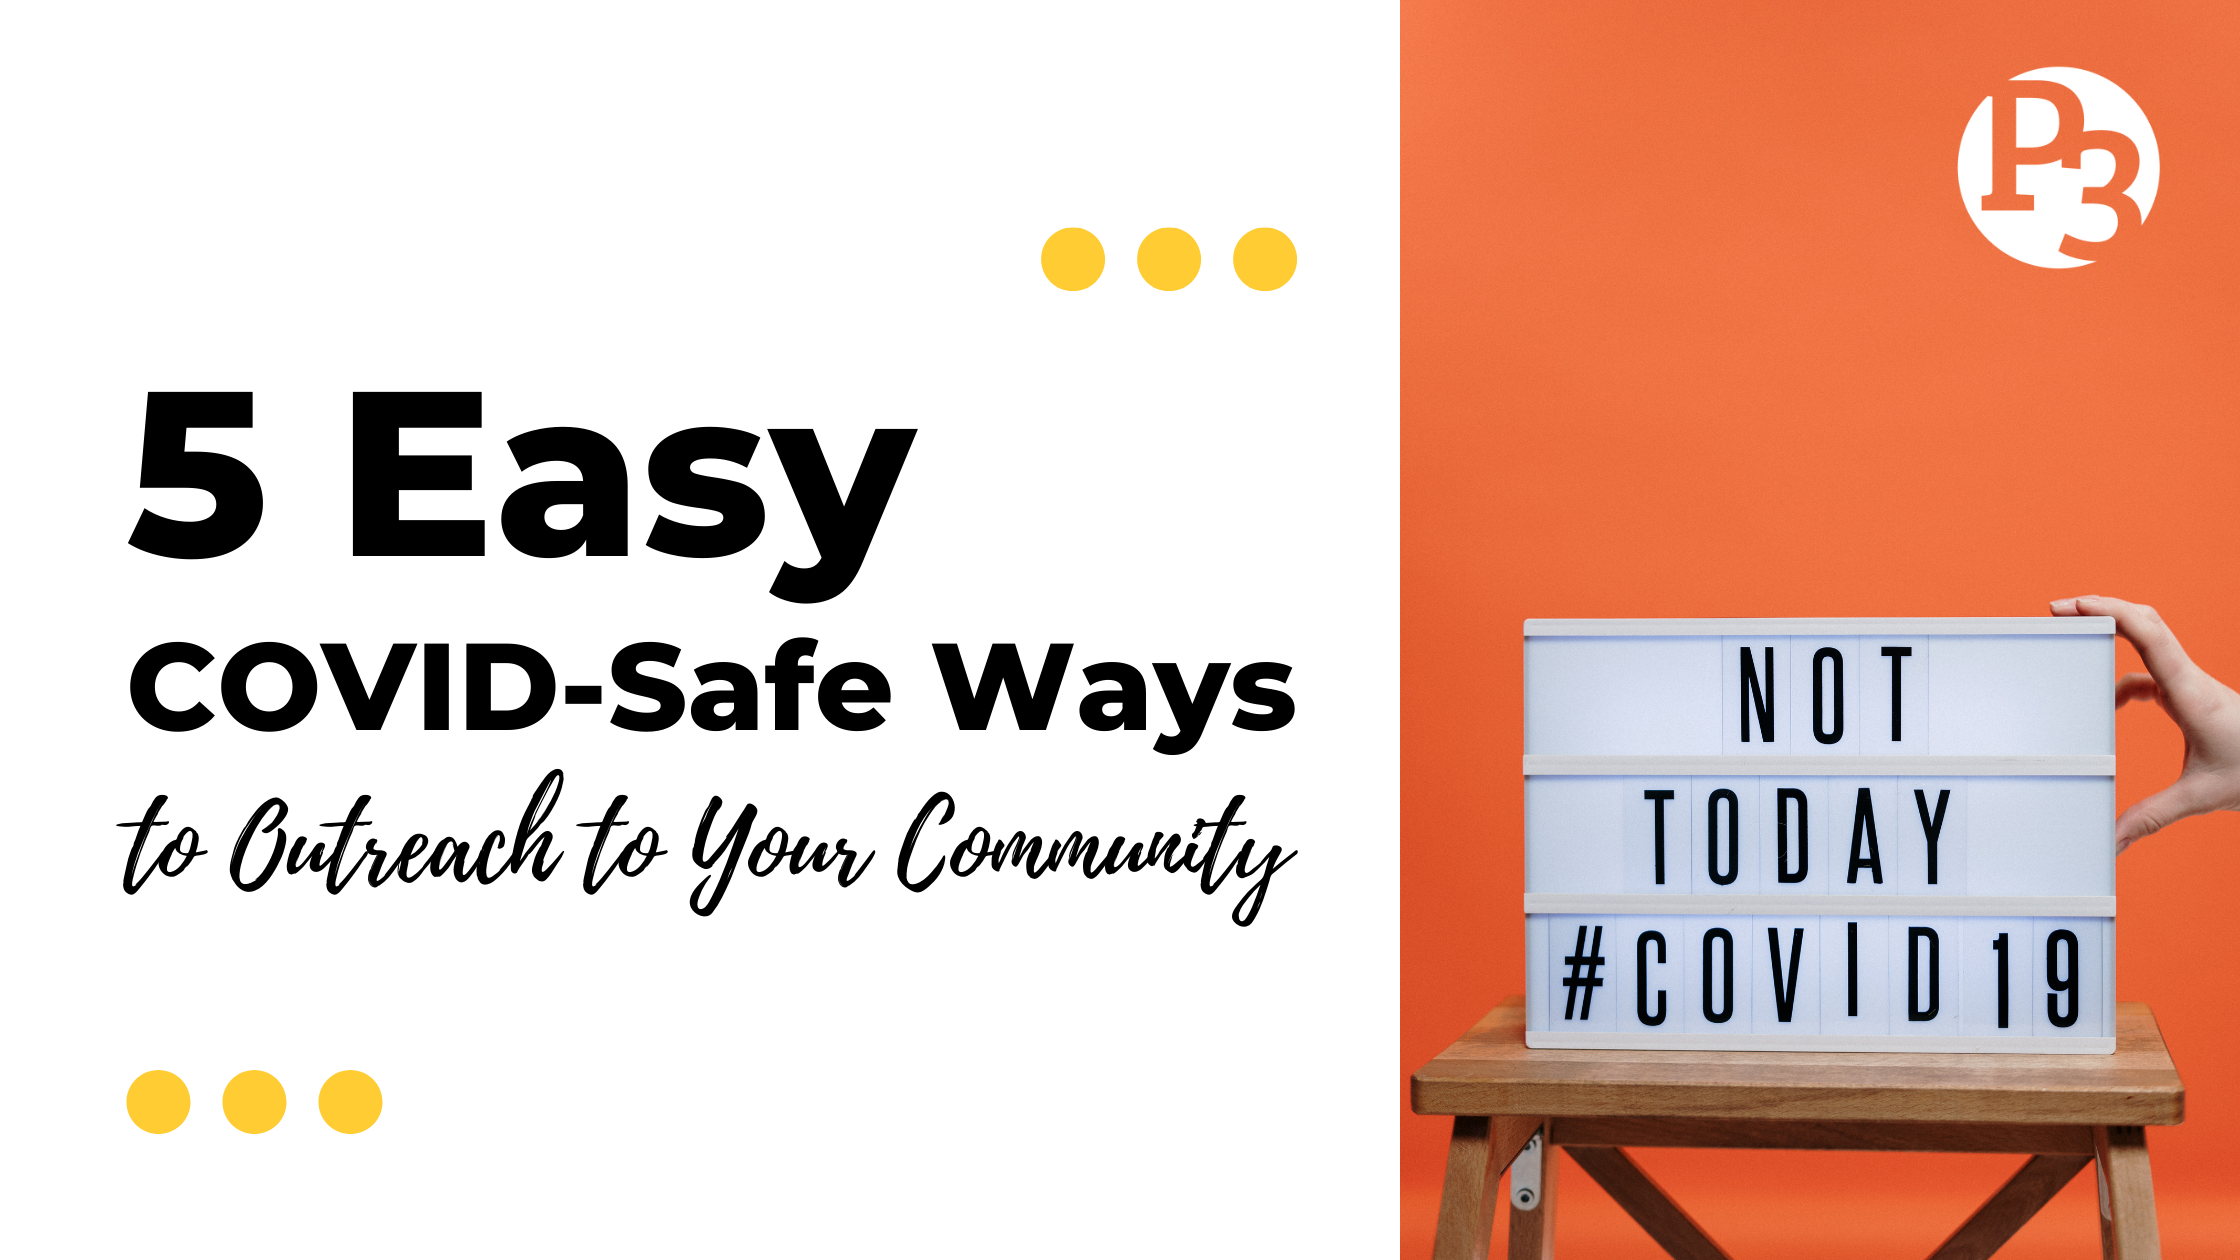 5 Easy COVID-Safe Ways to Outreach to Your Community